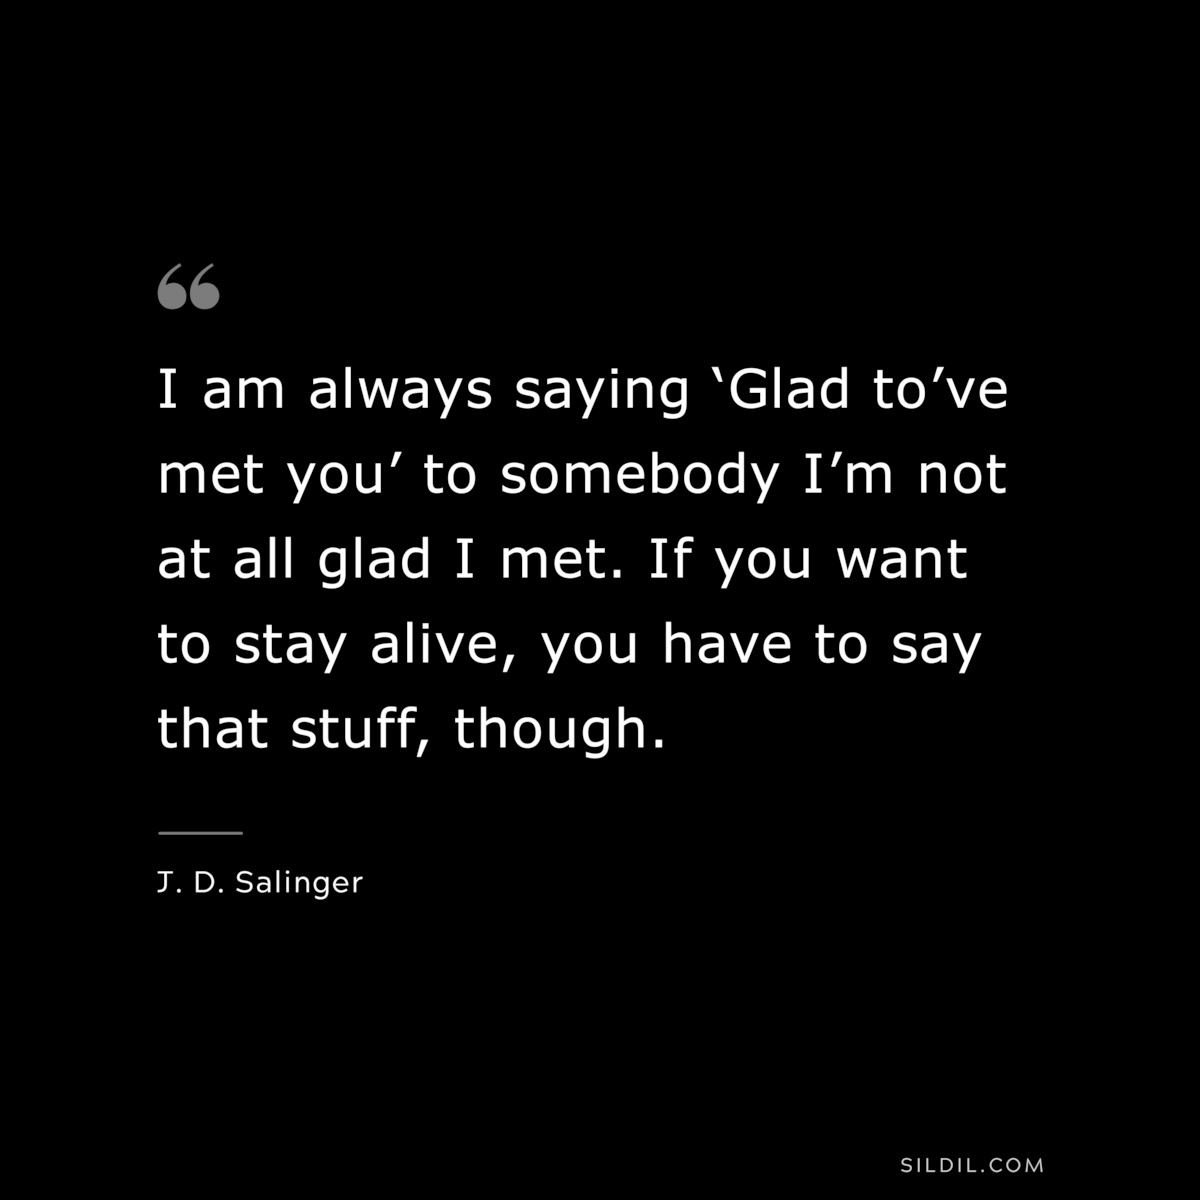 I am always saying ‘Glad to’ve met you’ to somebody I’m not at all glad I met. If you want to stay alive, you have to say that stuff, though. — J. D. Salinger